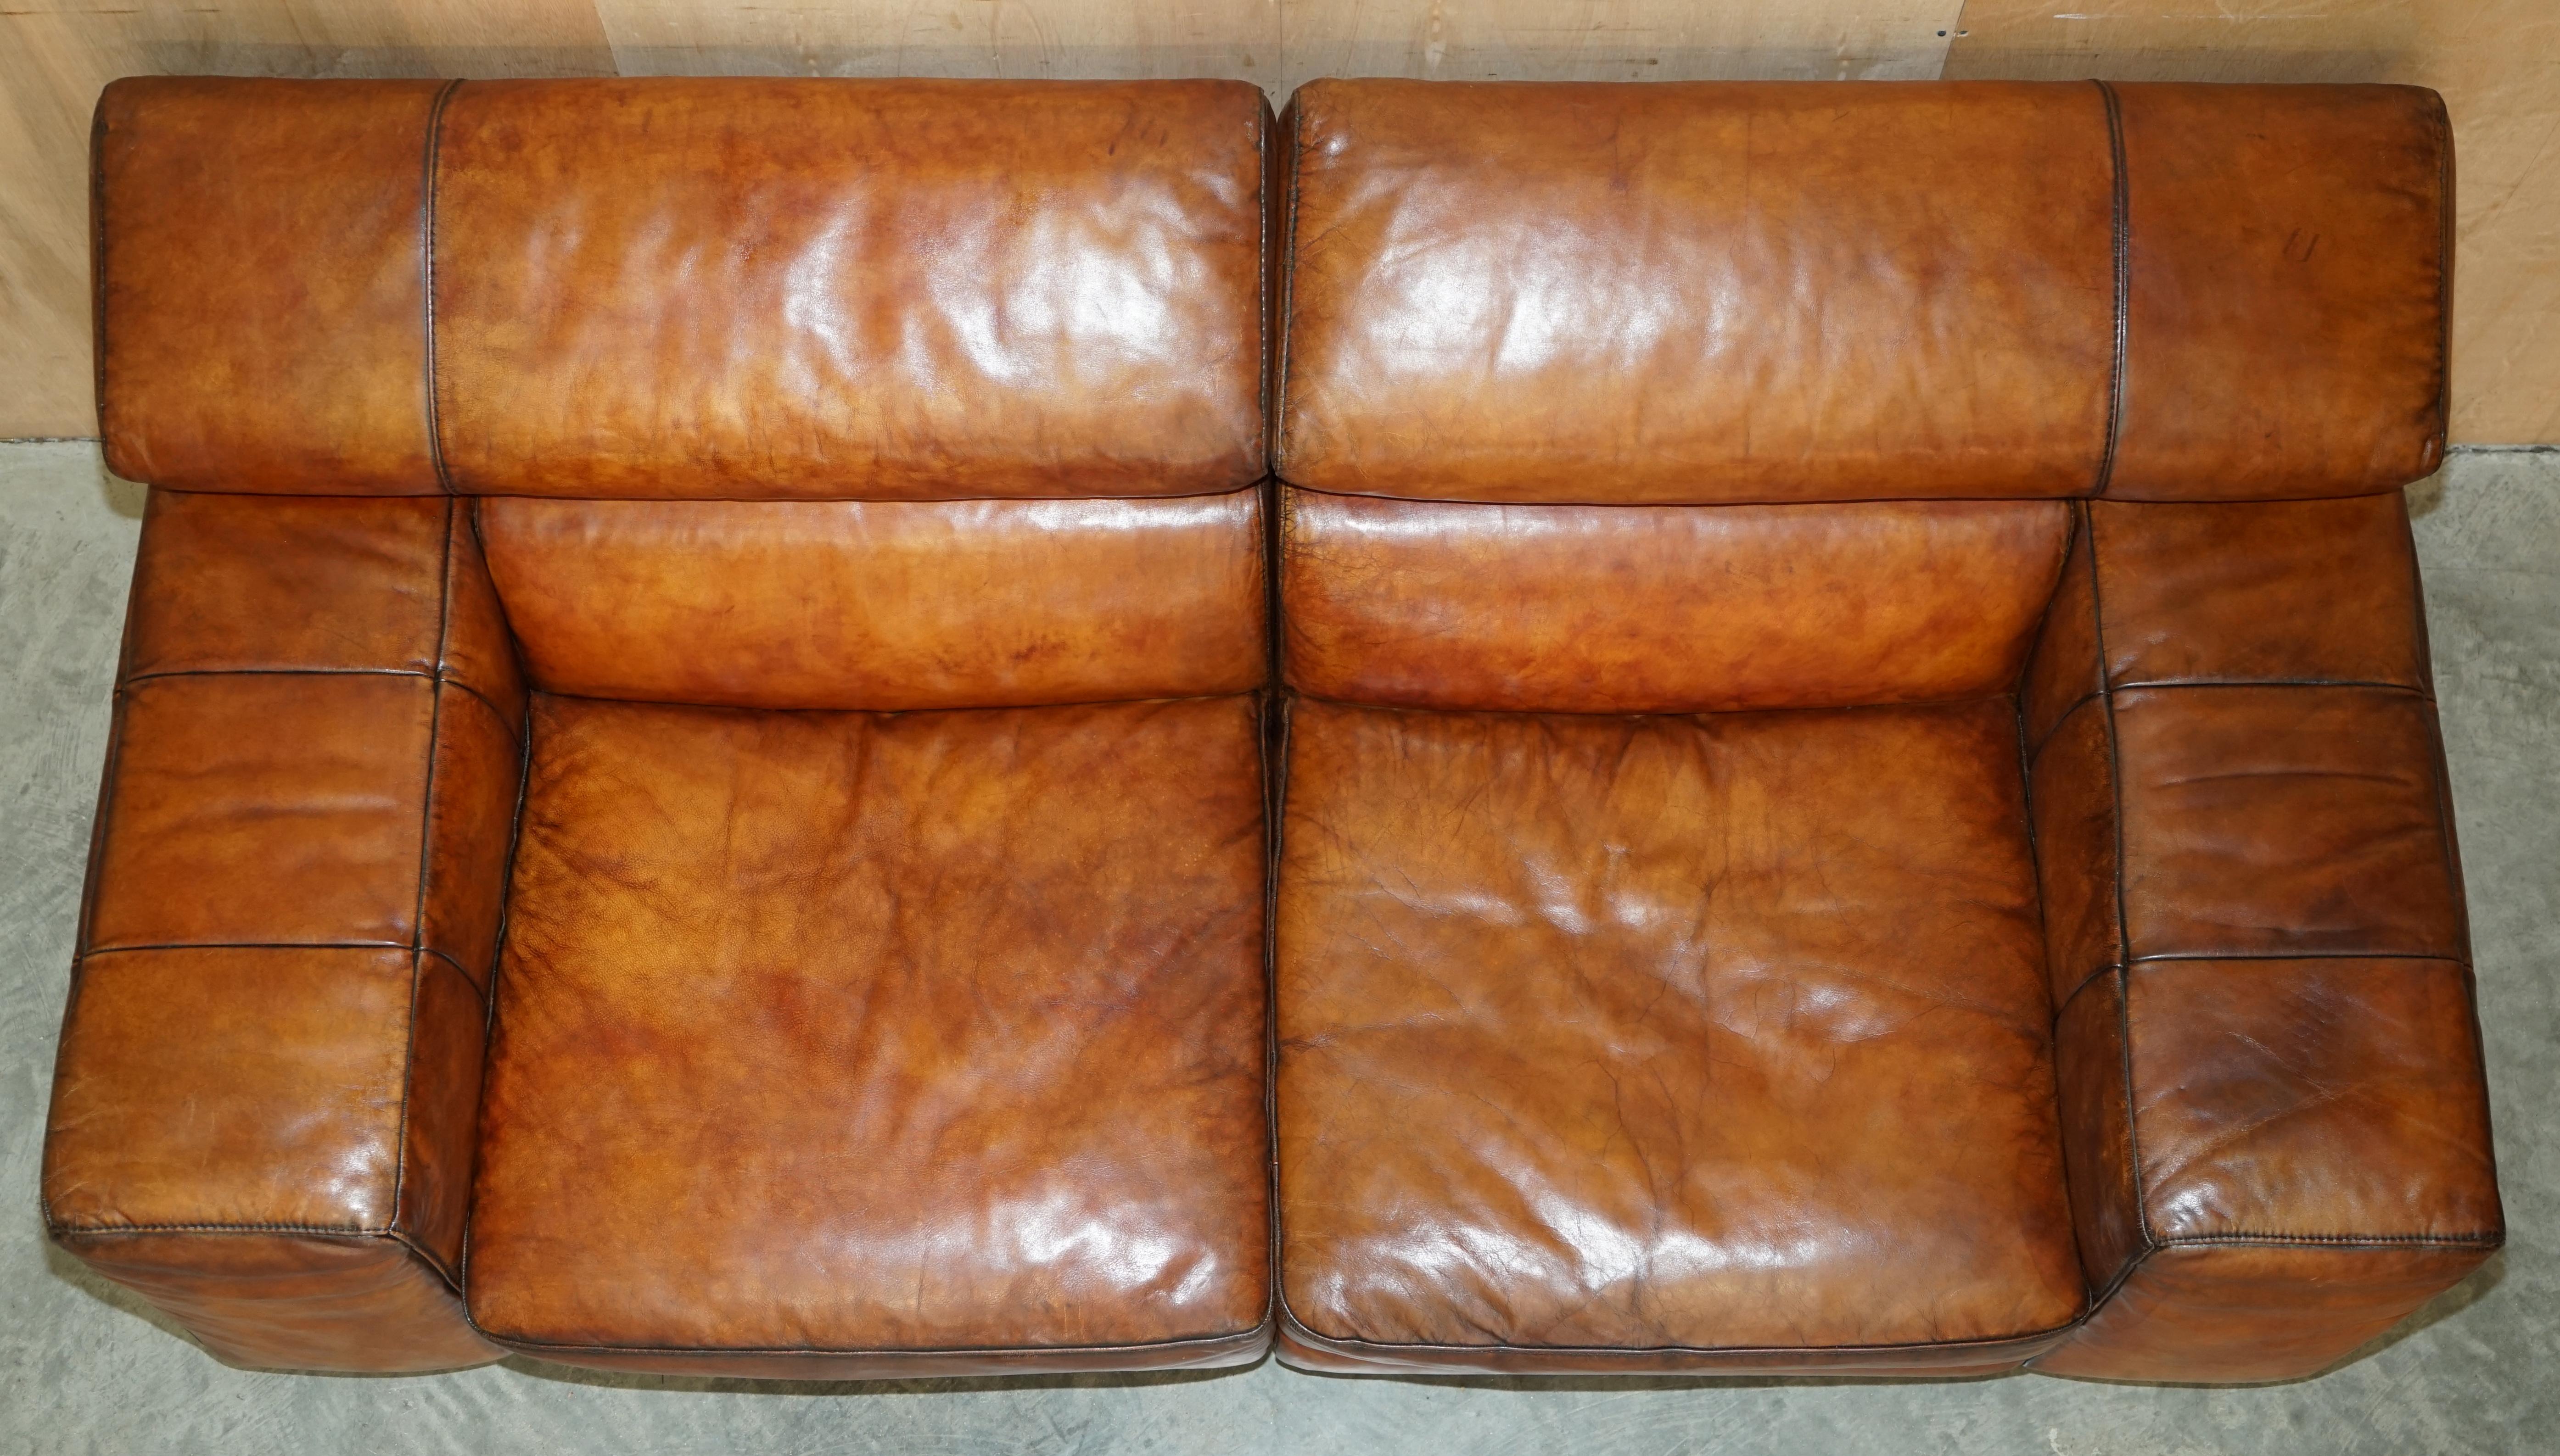 Natuzzi Roma Hand Dyed Cigar Brown Leather Sofa Raising Headrest Part of a Suite For Sale 5